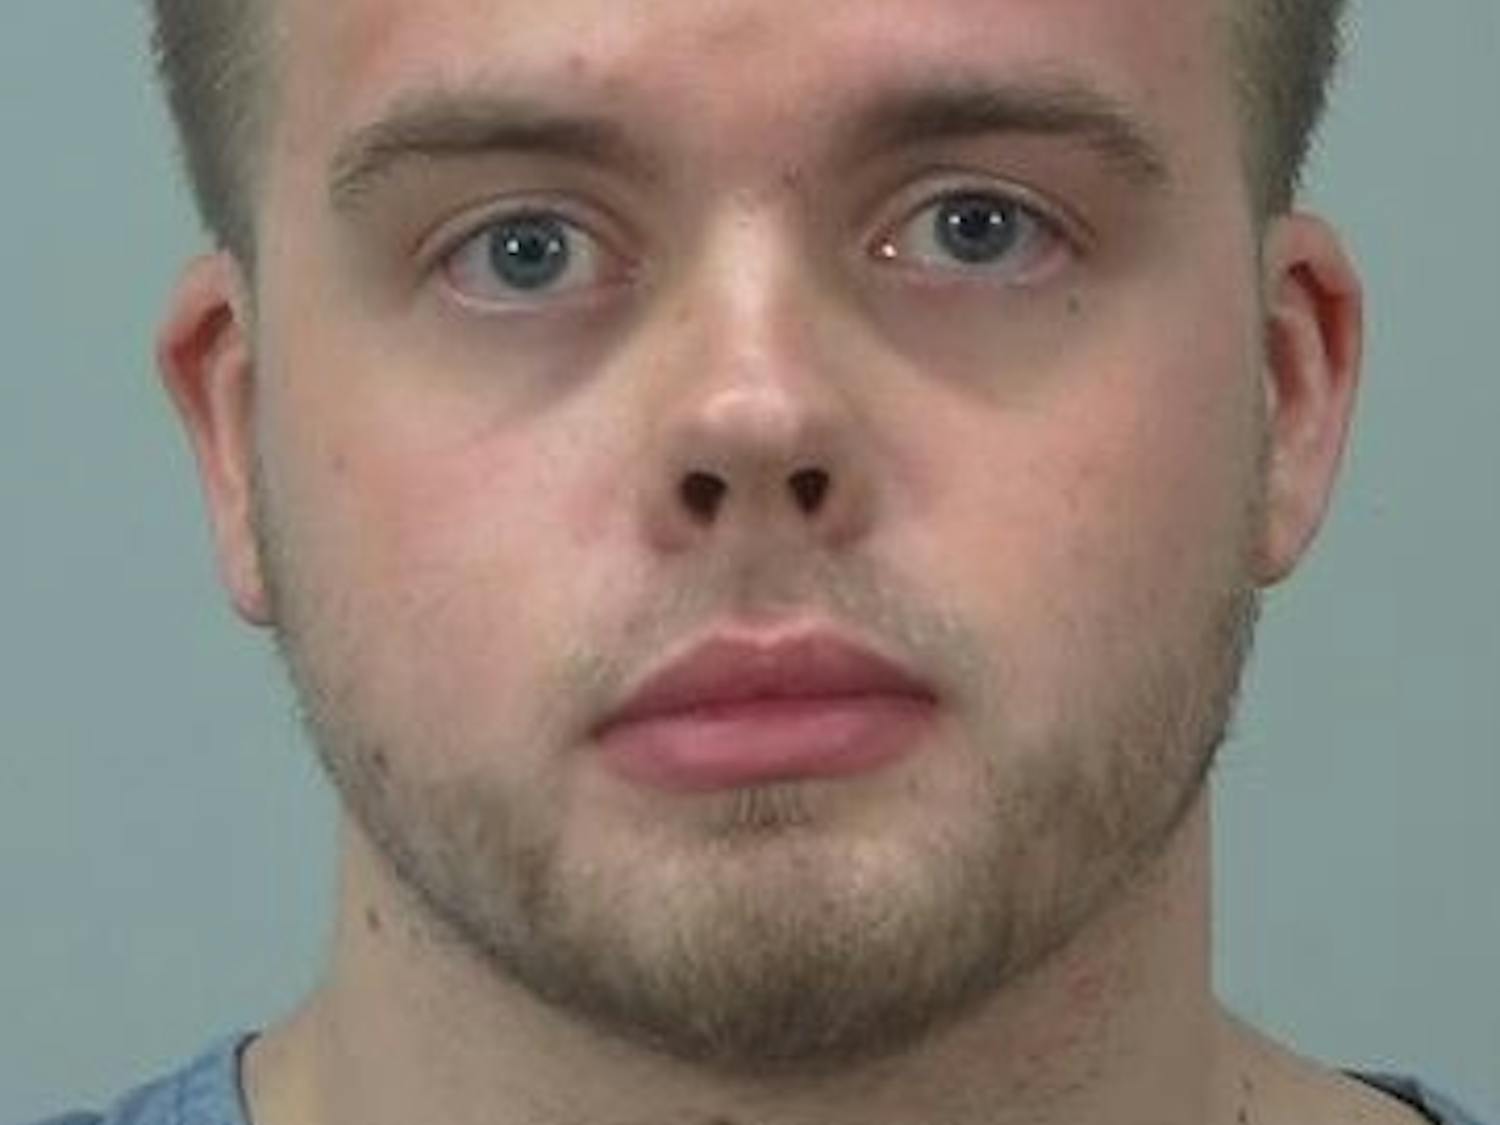 22-year-old Nathan Friar, a suspended UW-Madison student, will serve eight years of probation for a second-degree sexual assault he was convicted of in April.